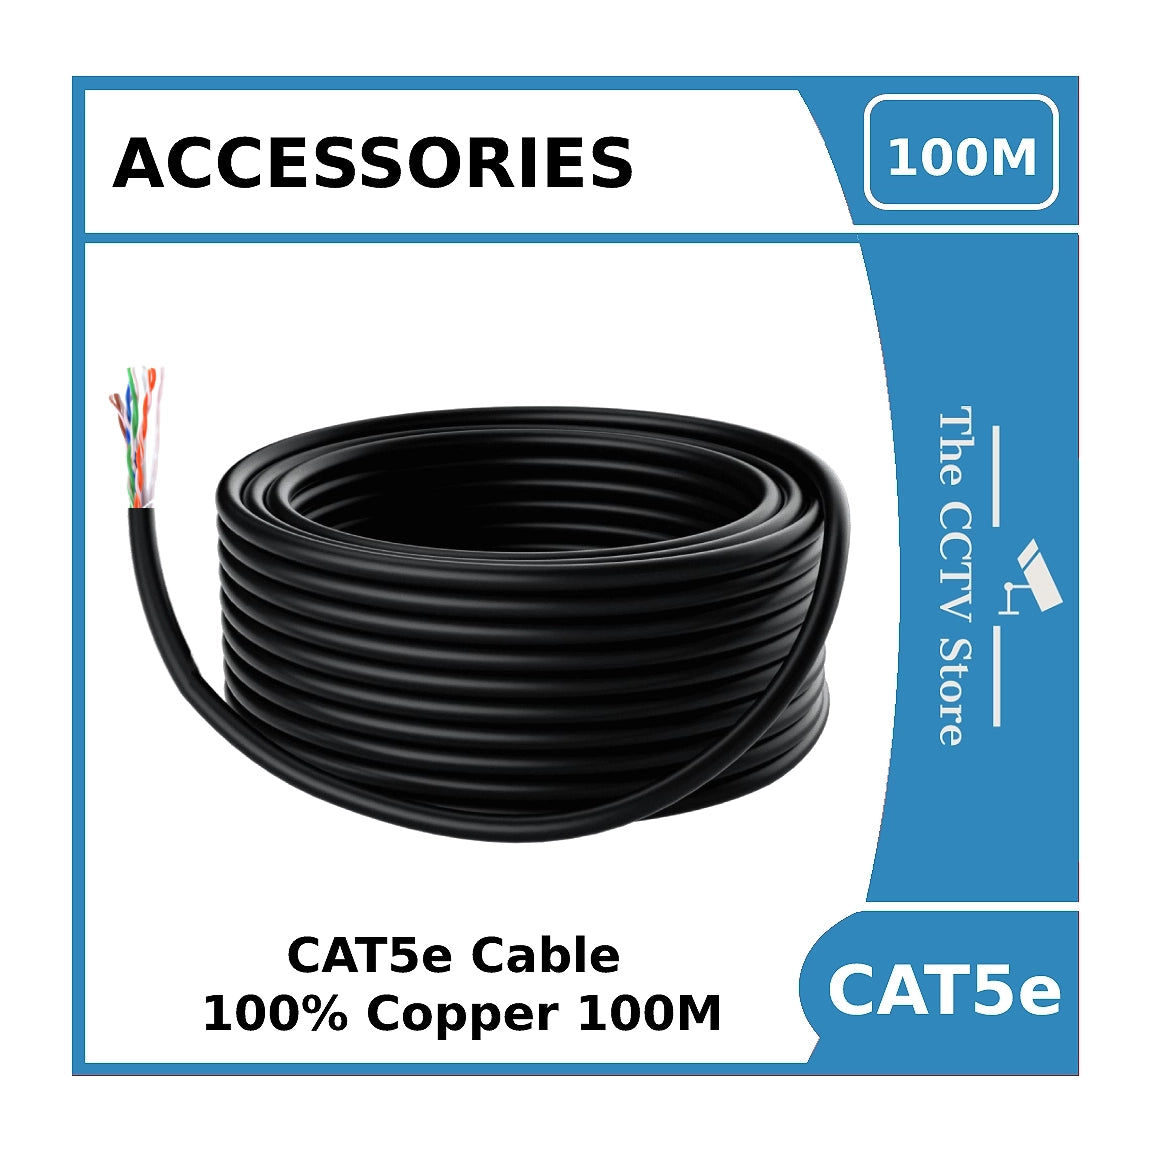 CAT5e Full Copper Outdoor UTP Networking Cable - Black - 100m